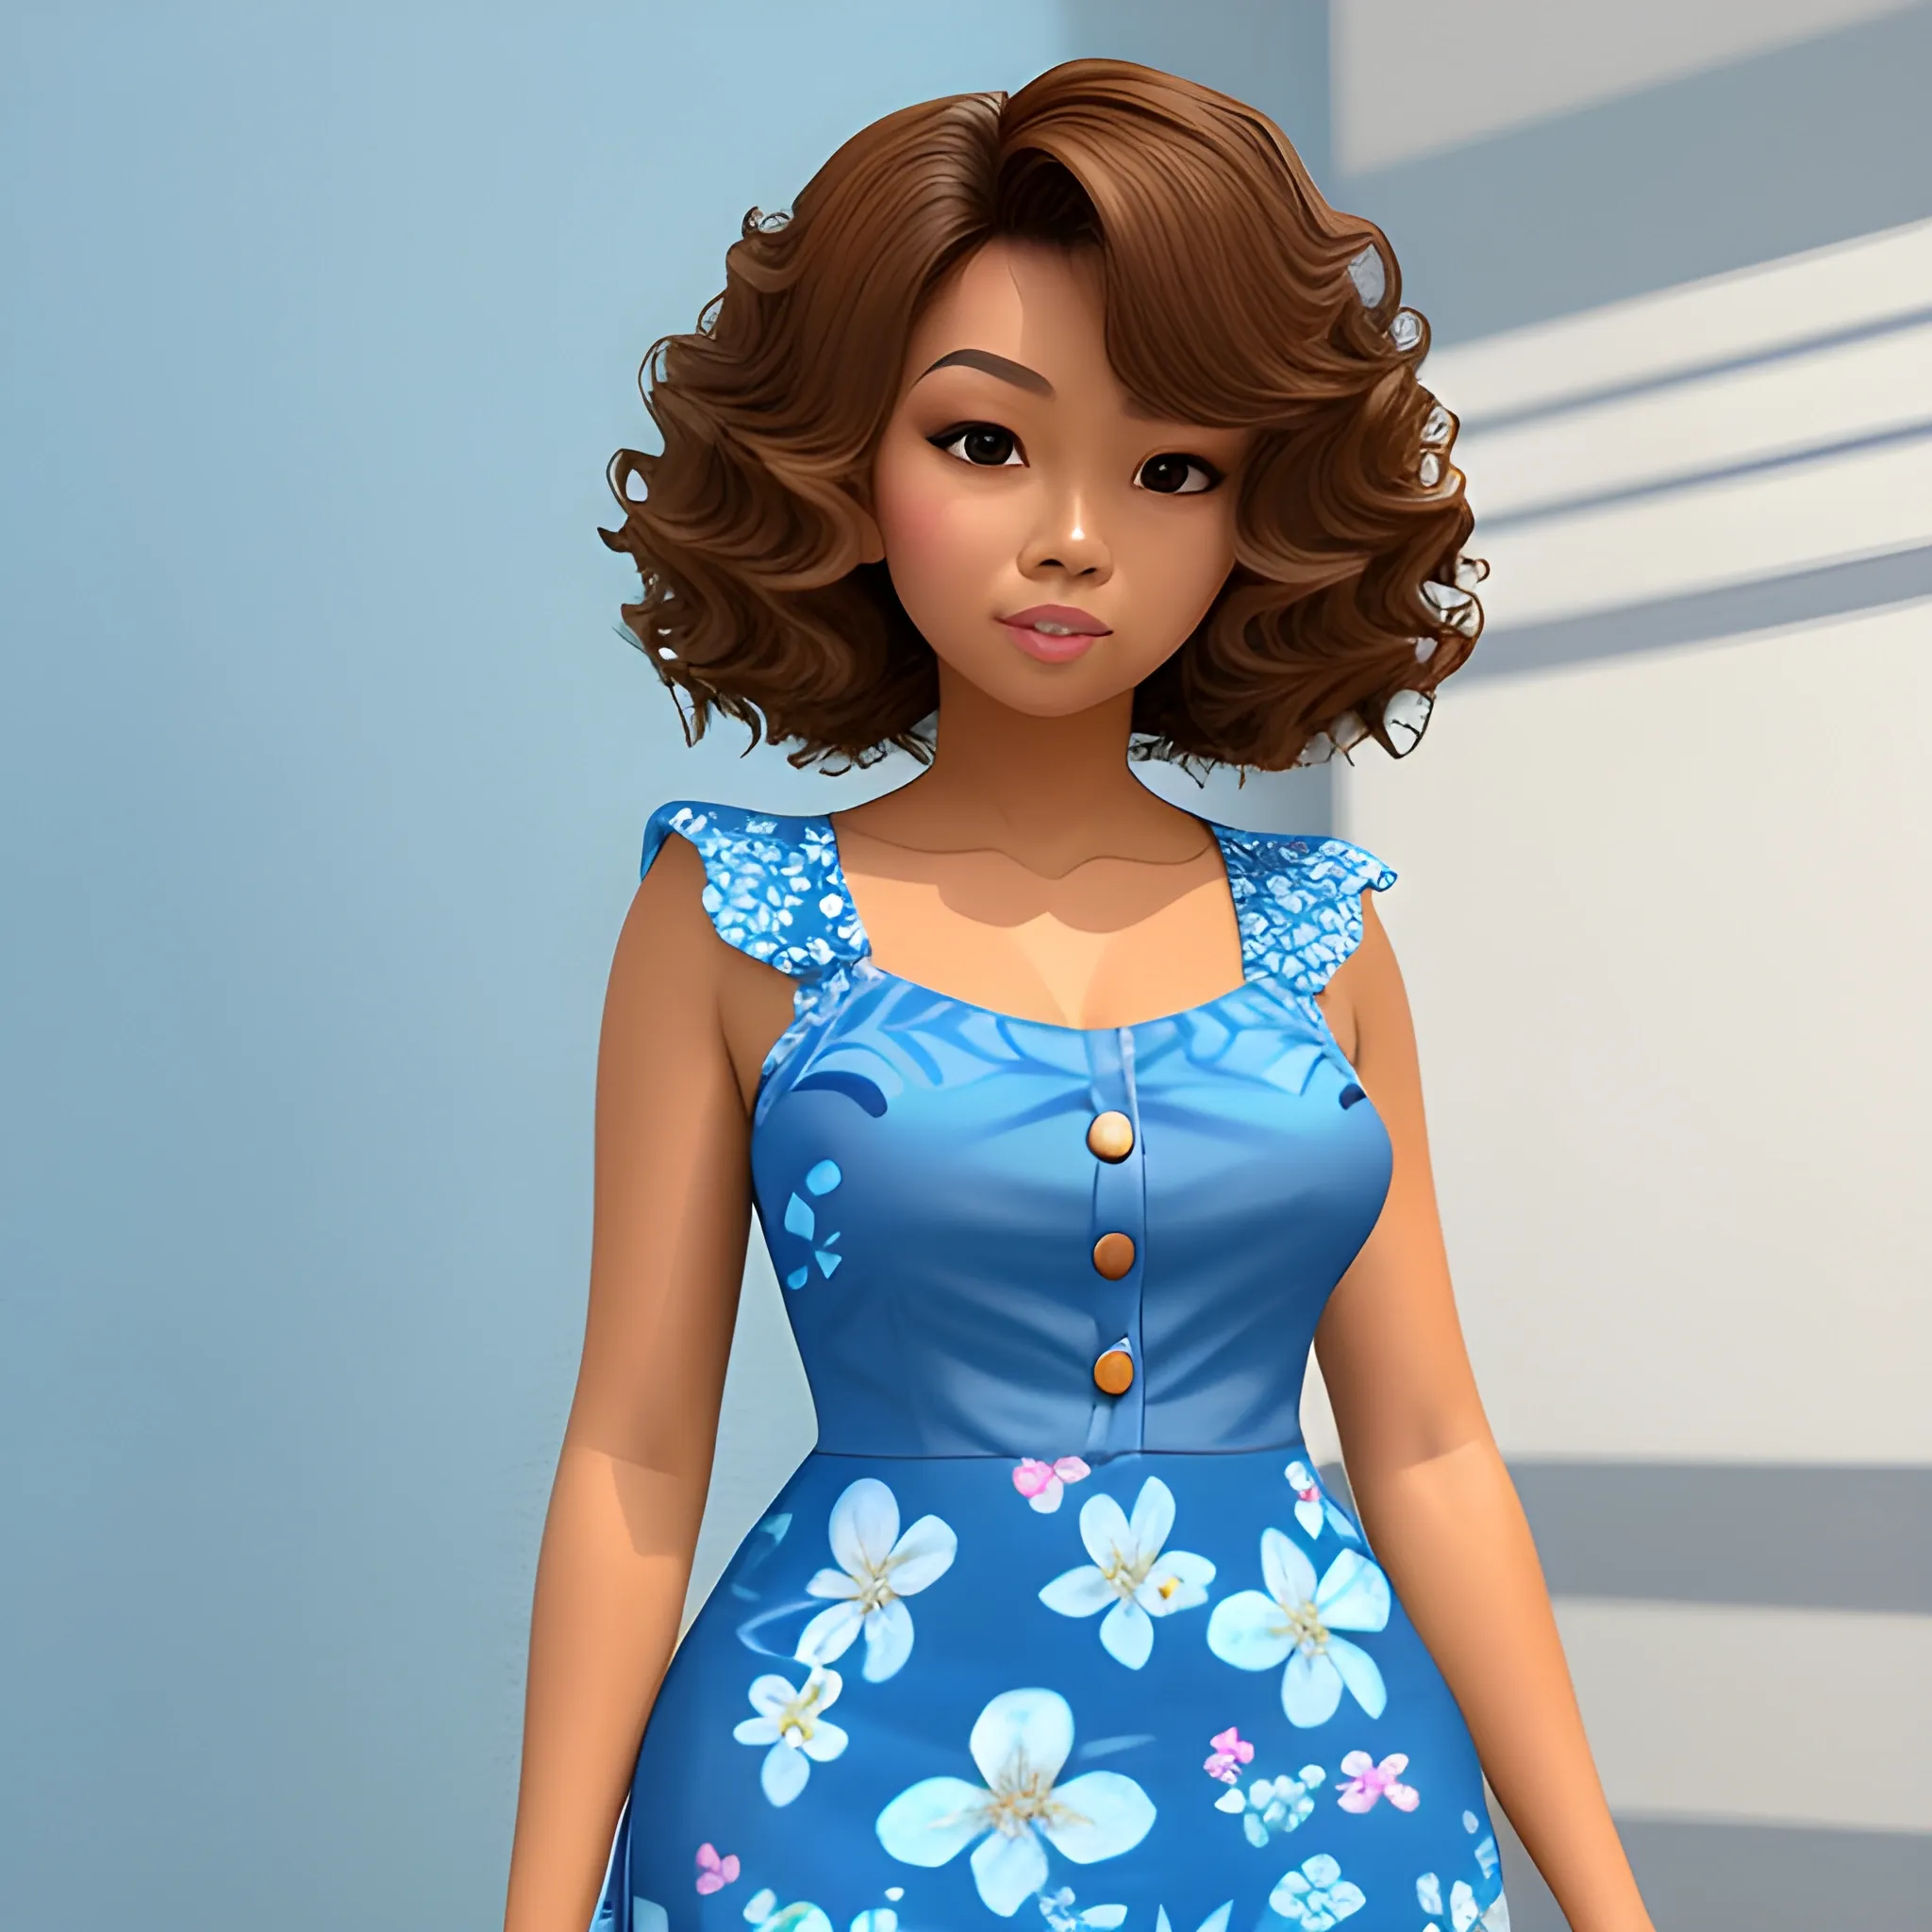 5'4 thick Filipina tanned skin woman with short butterfly curly hair and cute flat button nose in a blue floral Sunday dress, 3D